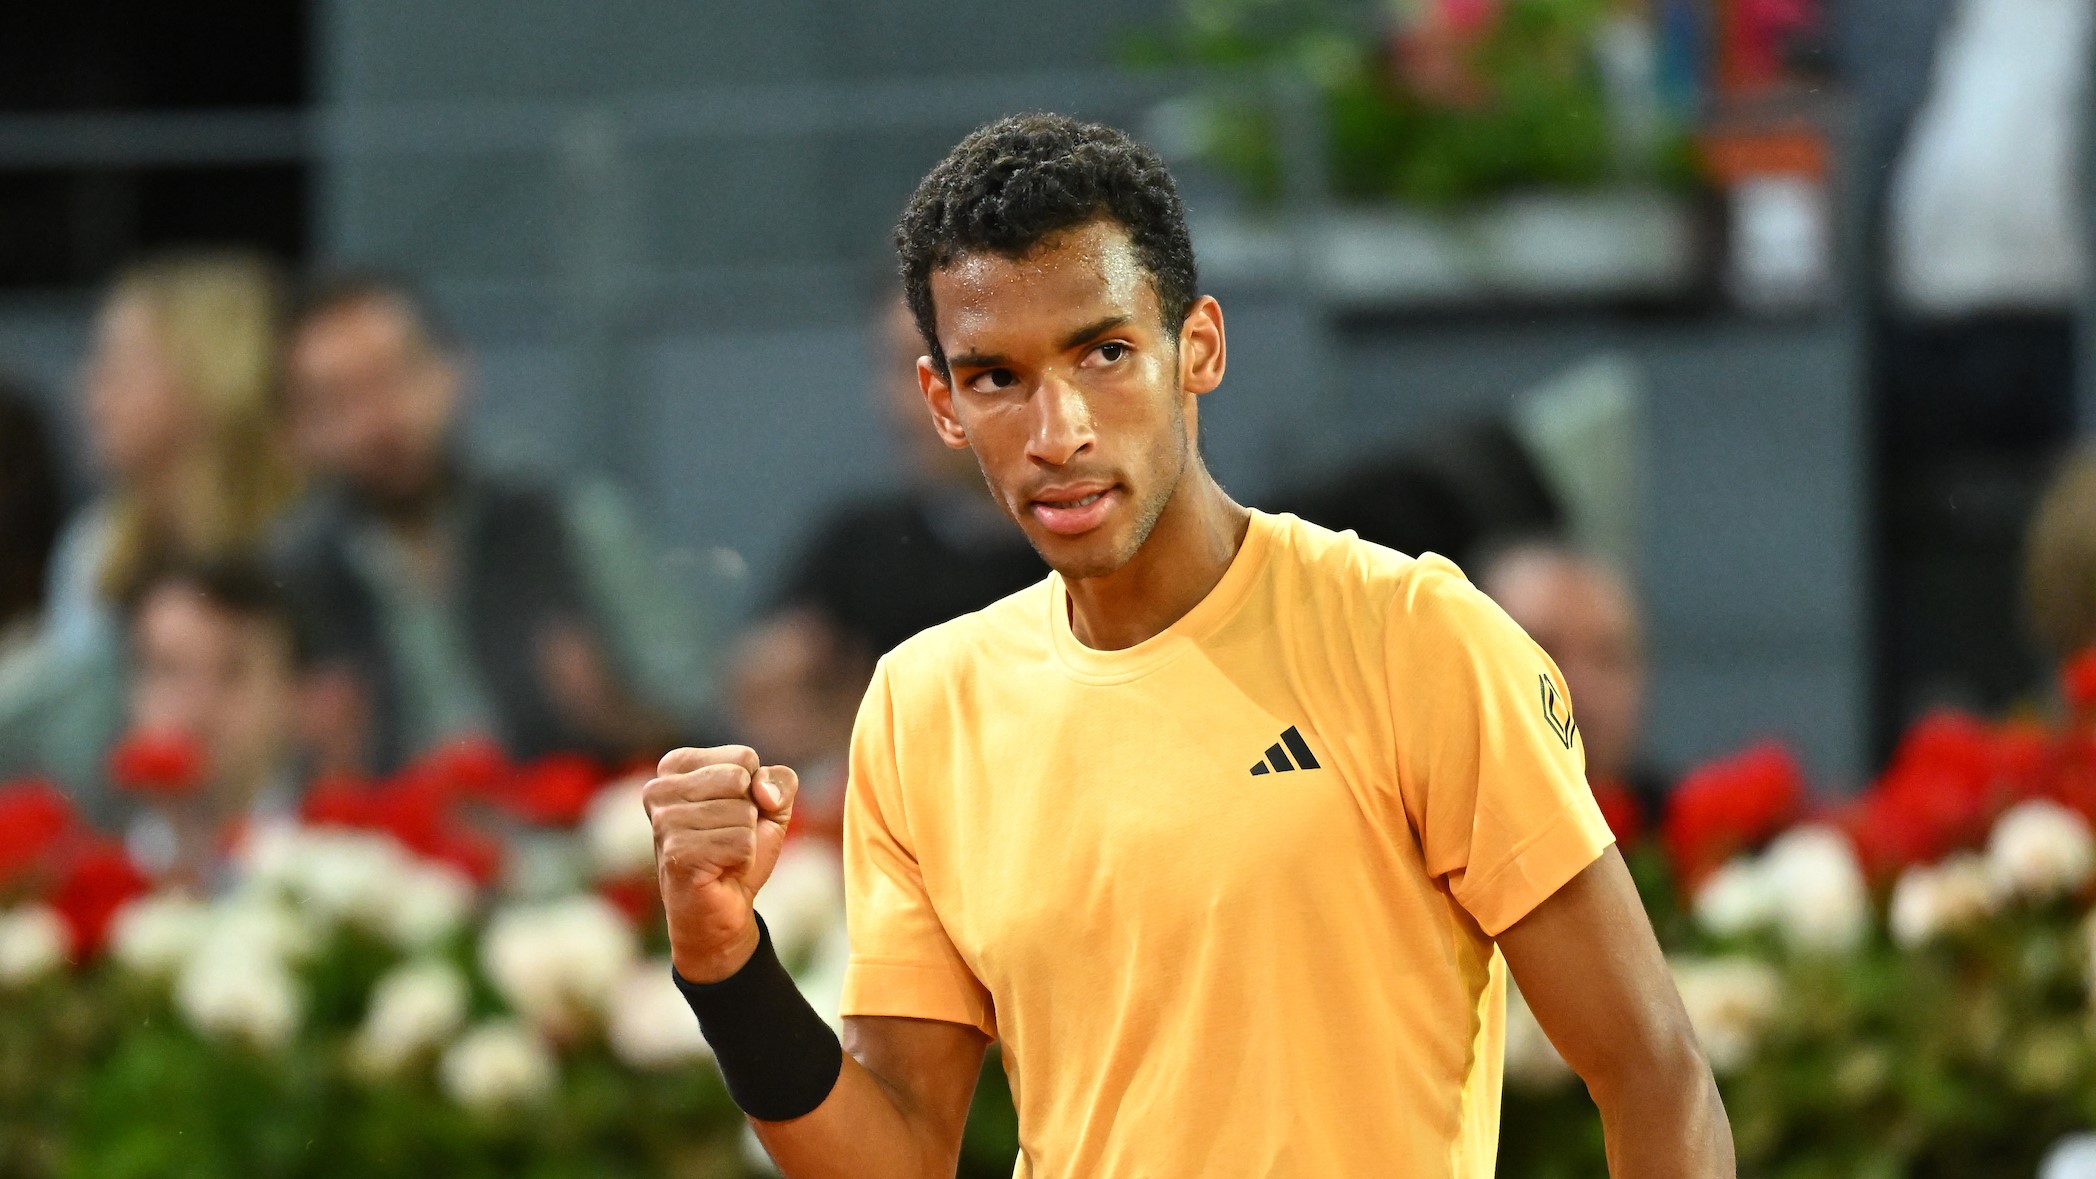 Felix Auger-Aliassime pumps his fist during the Madrid final. He is competing next in Rome.